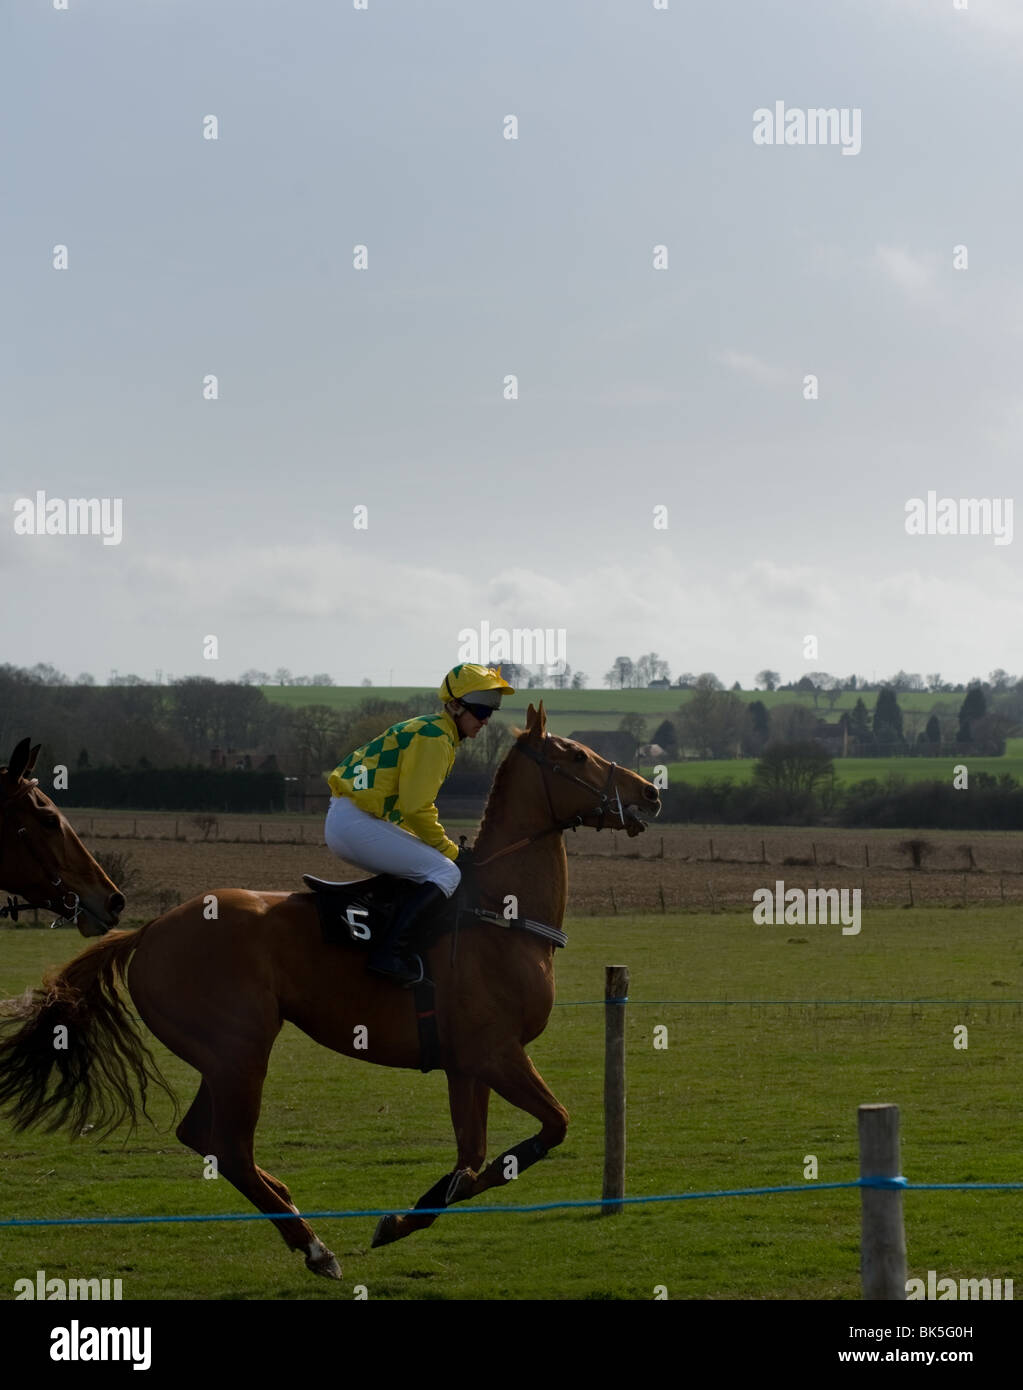 One horse closely follows another at a race meeting Stock Photo